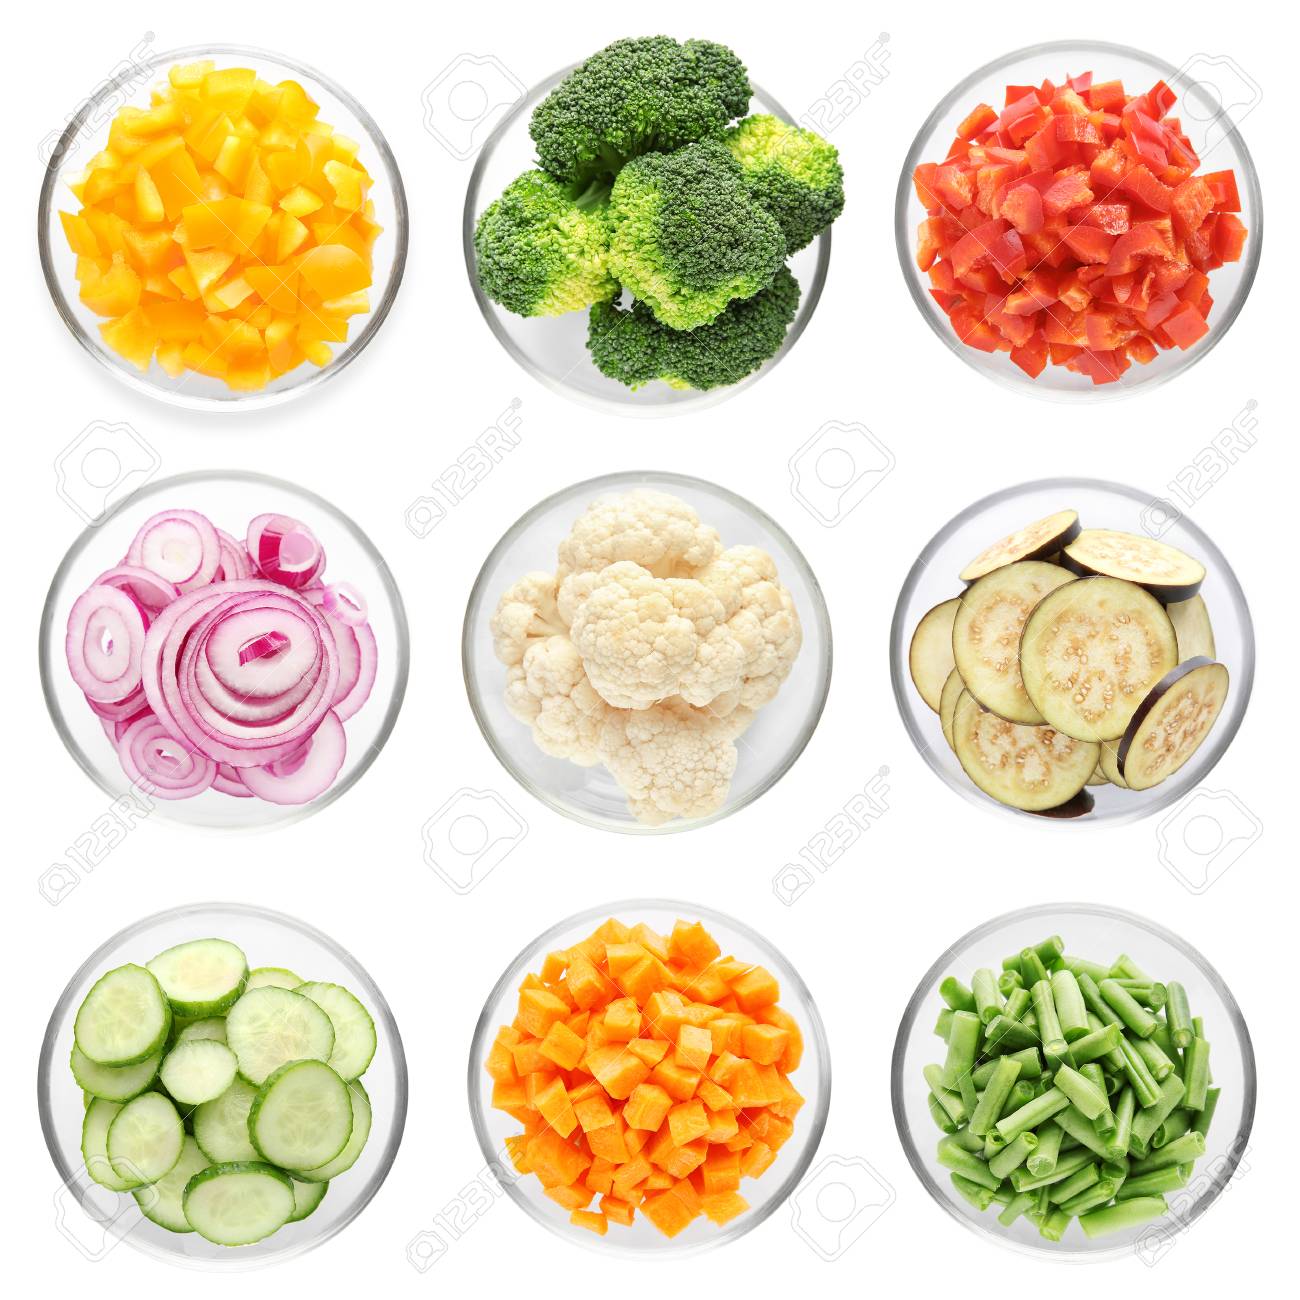 Variety Of Chopped Vegetables On White Background Stock Photo